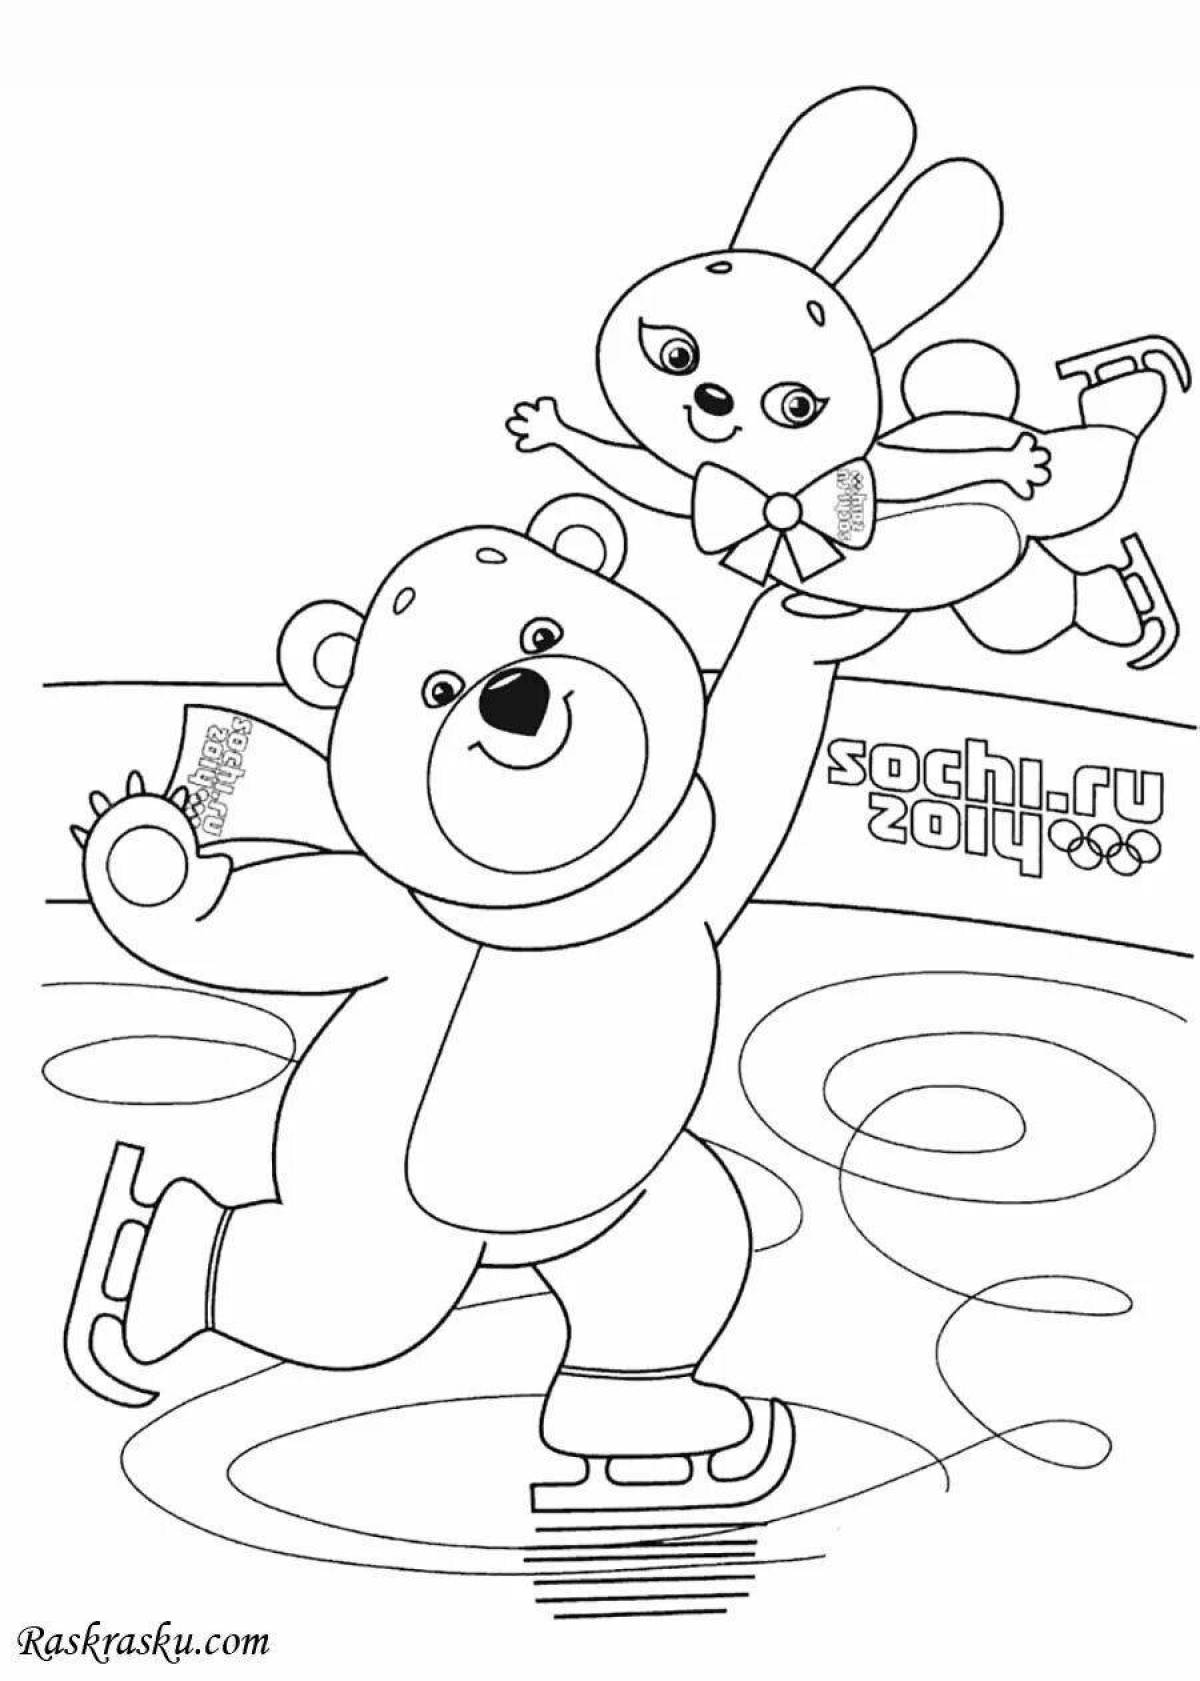 Fun coloring of the olympic bear for kids